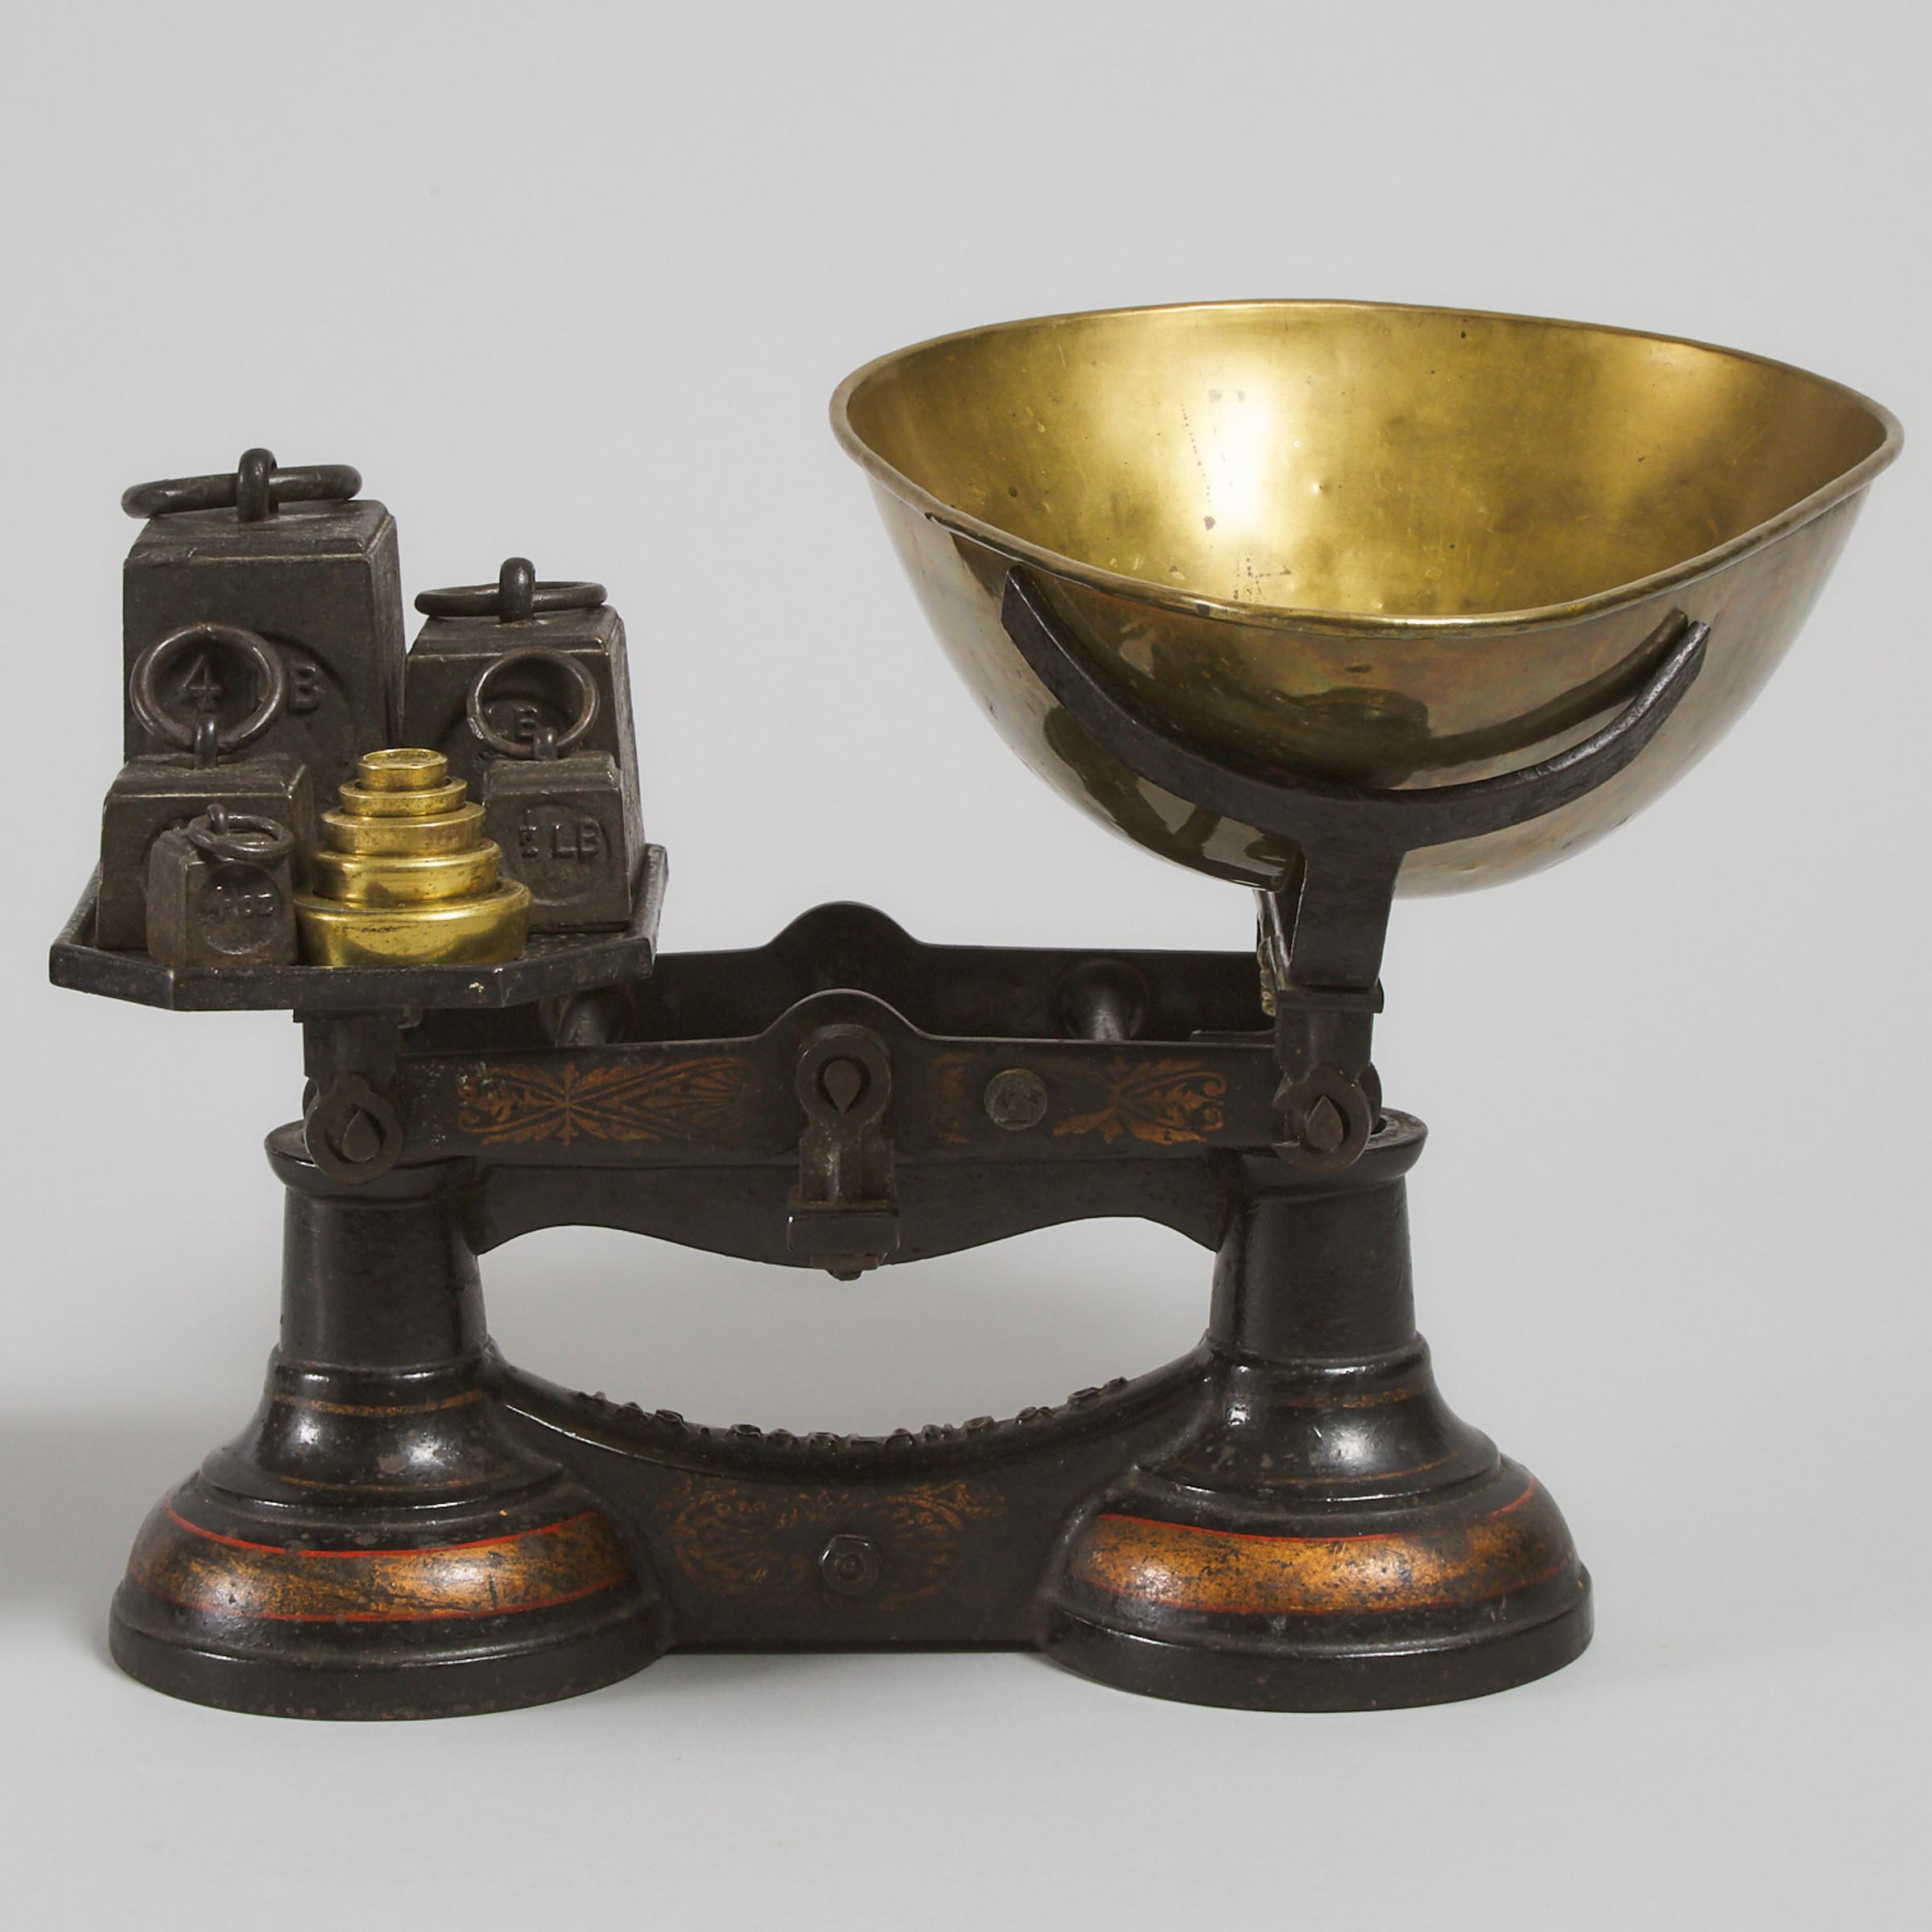 Victorian Paint Decorated Cast Iron and Brass Dry Goods Balance Scale, Jas. Garland & Co., Birmingham, 19th century